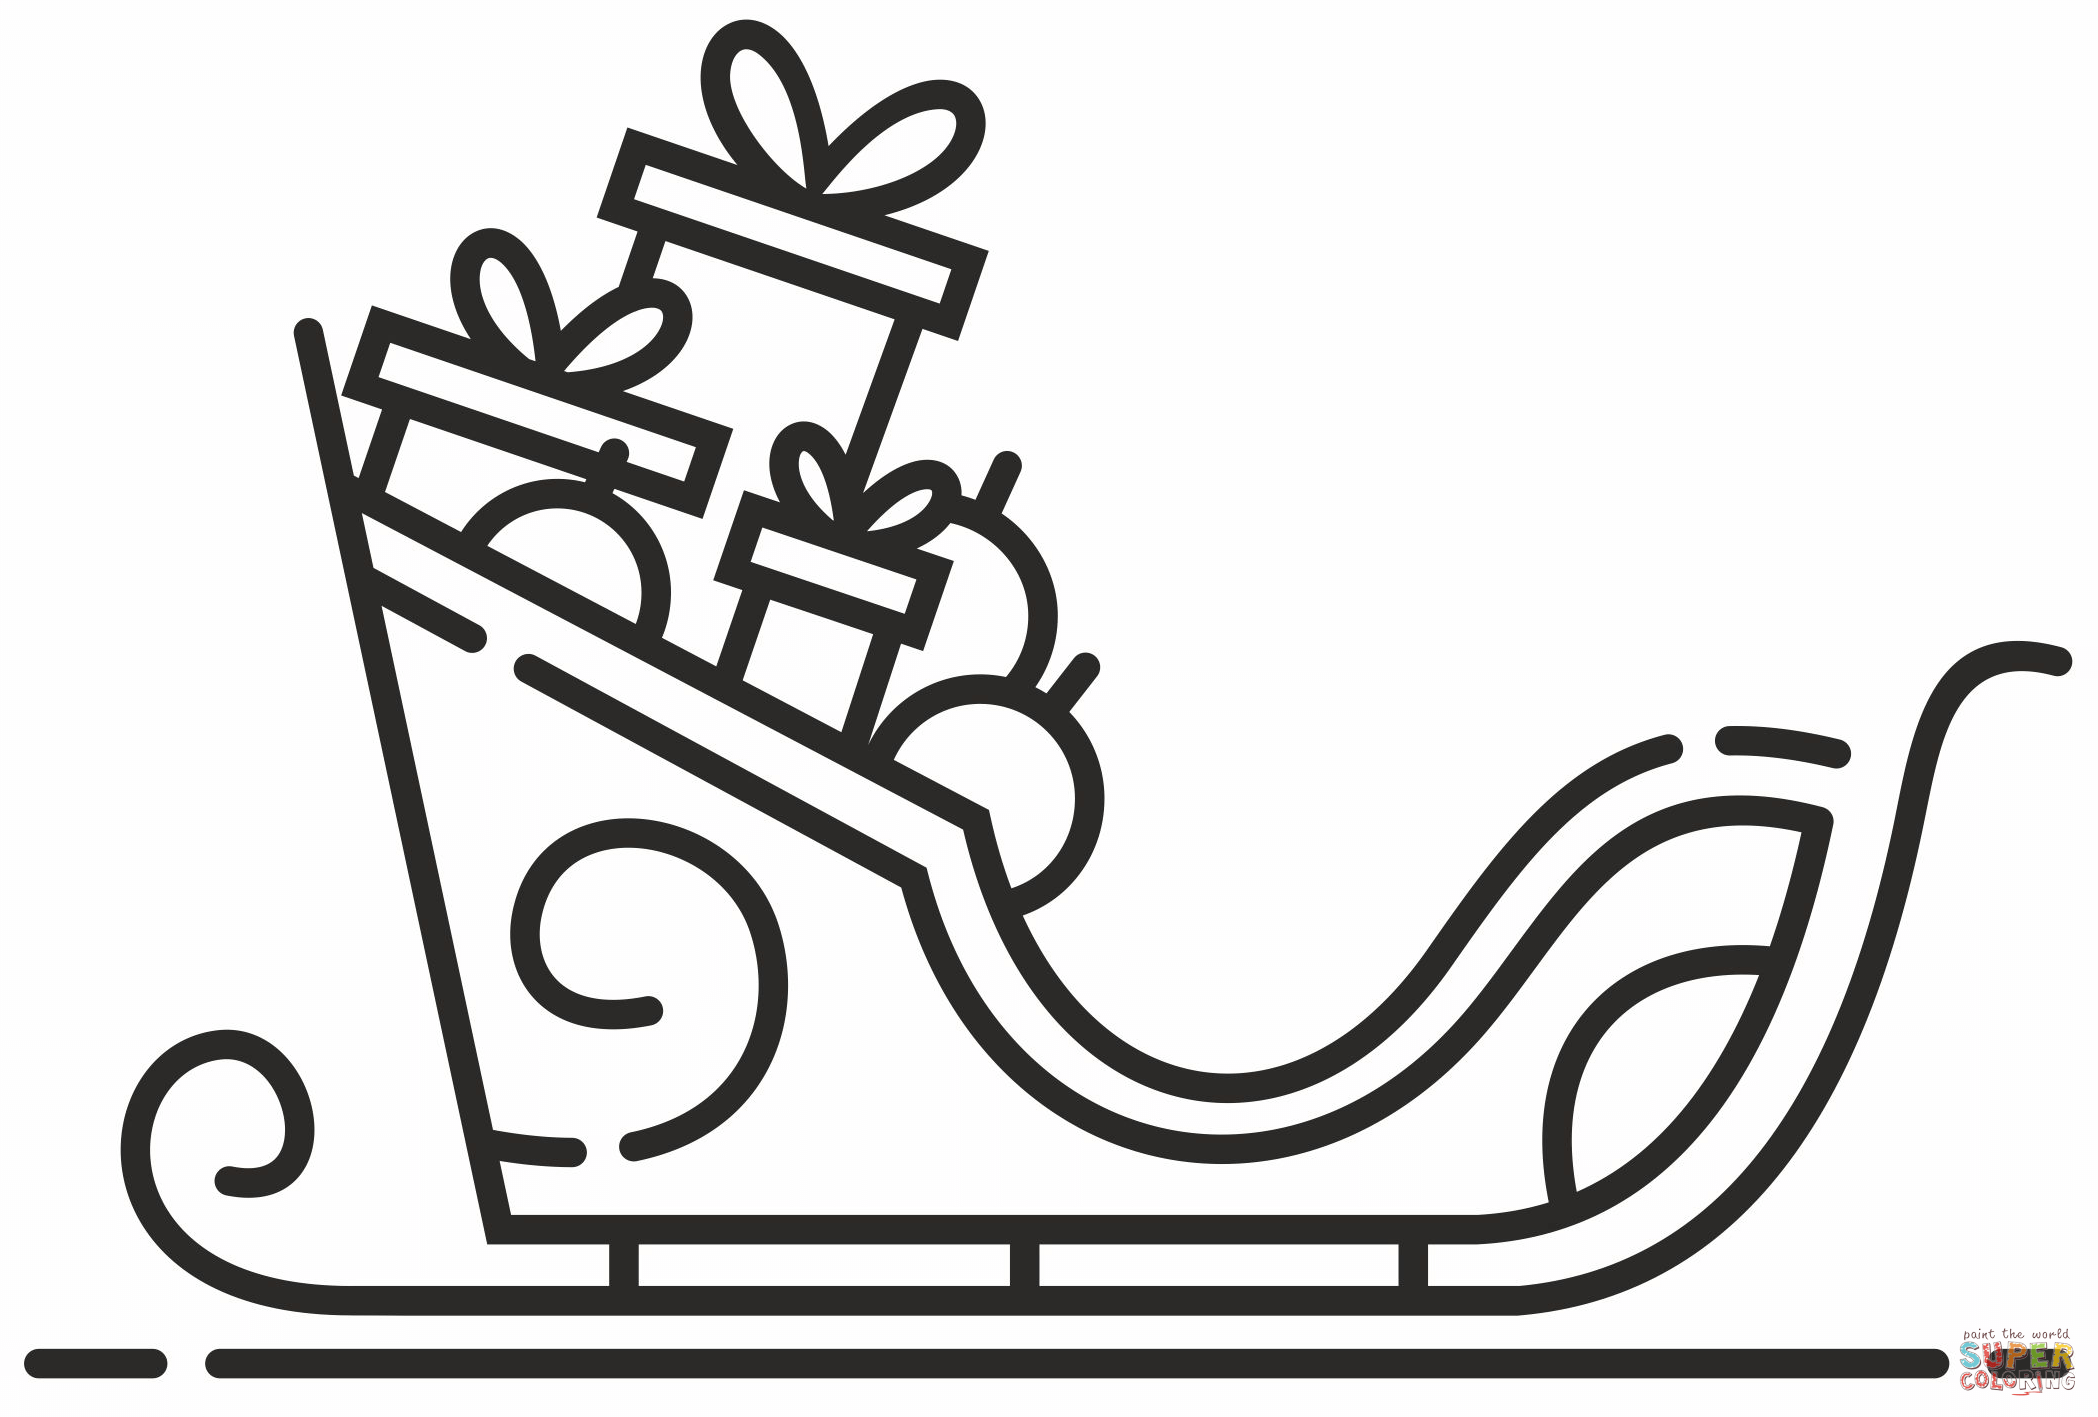 Santa sleigh coloring page free printable coloring pages